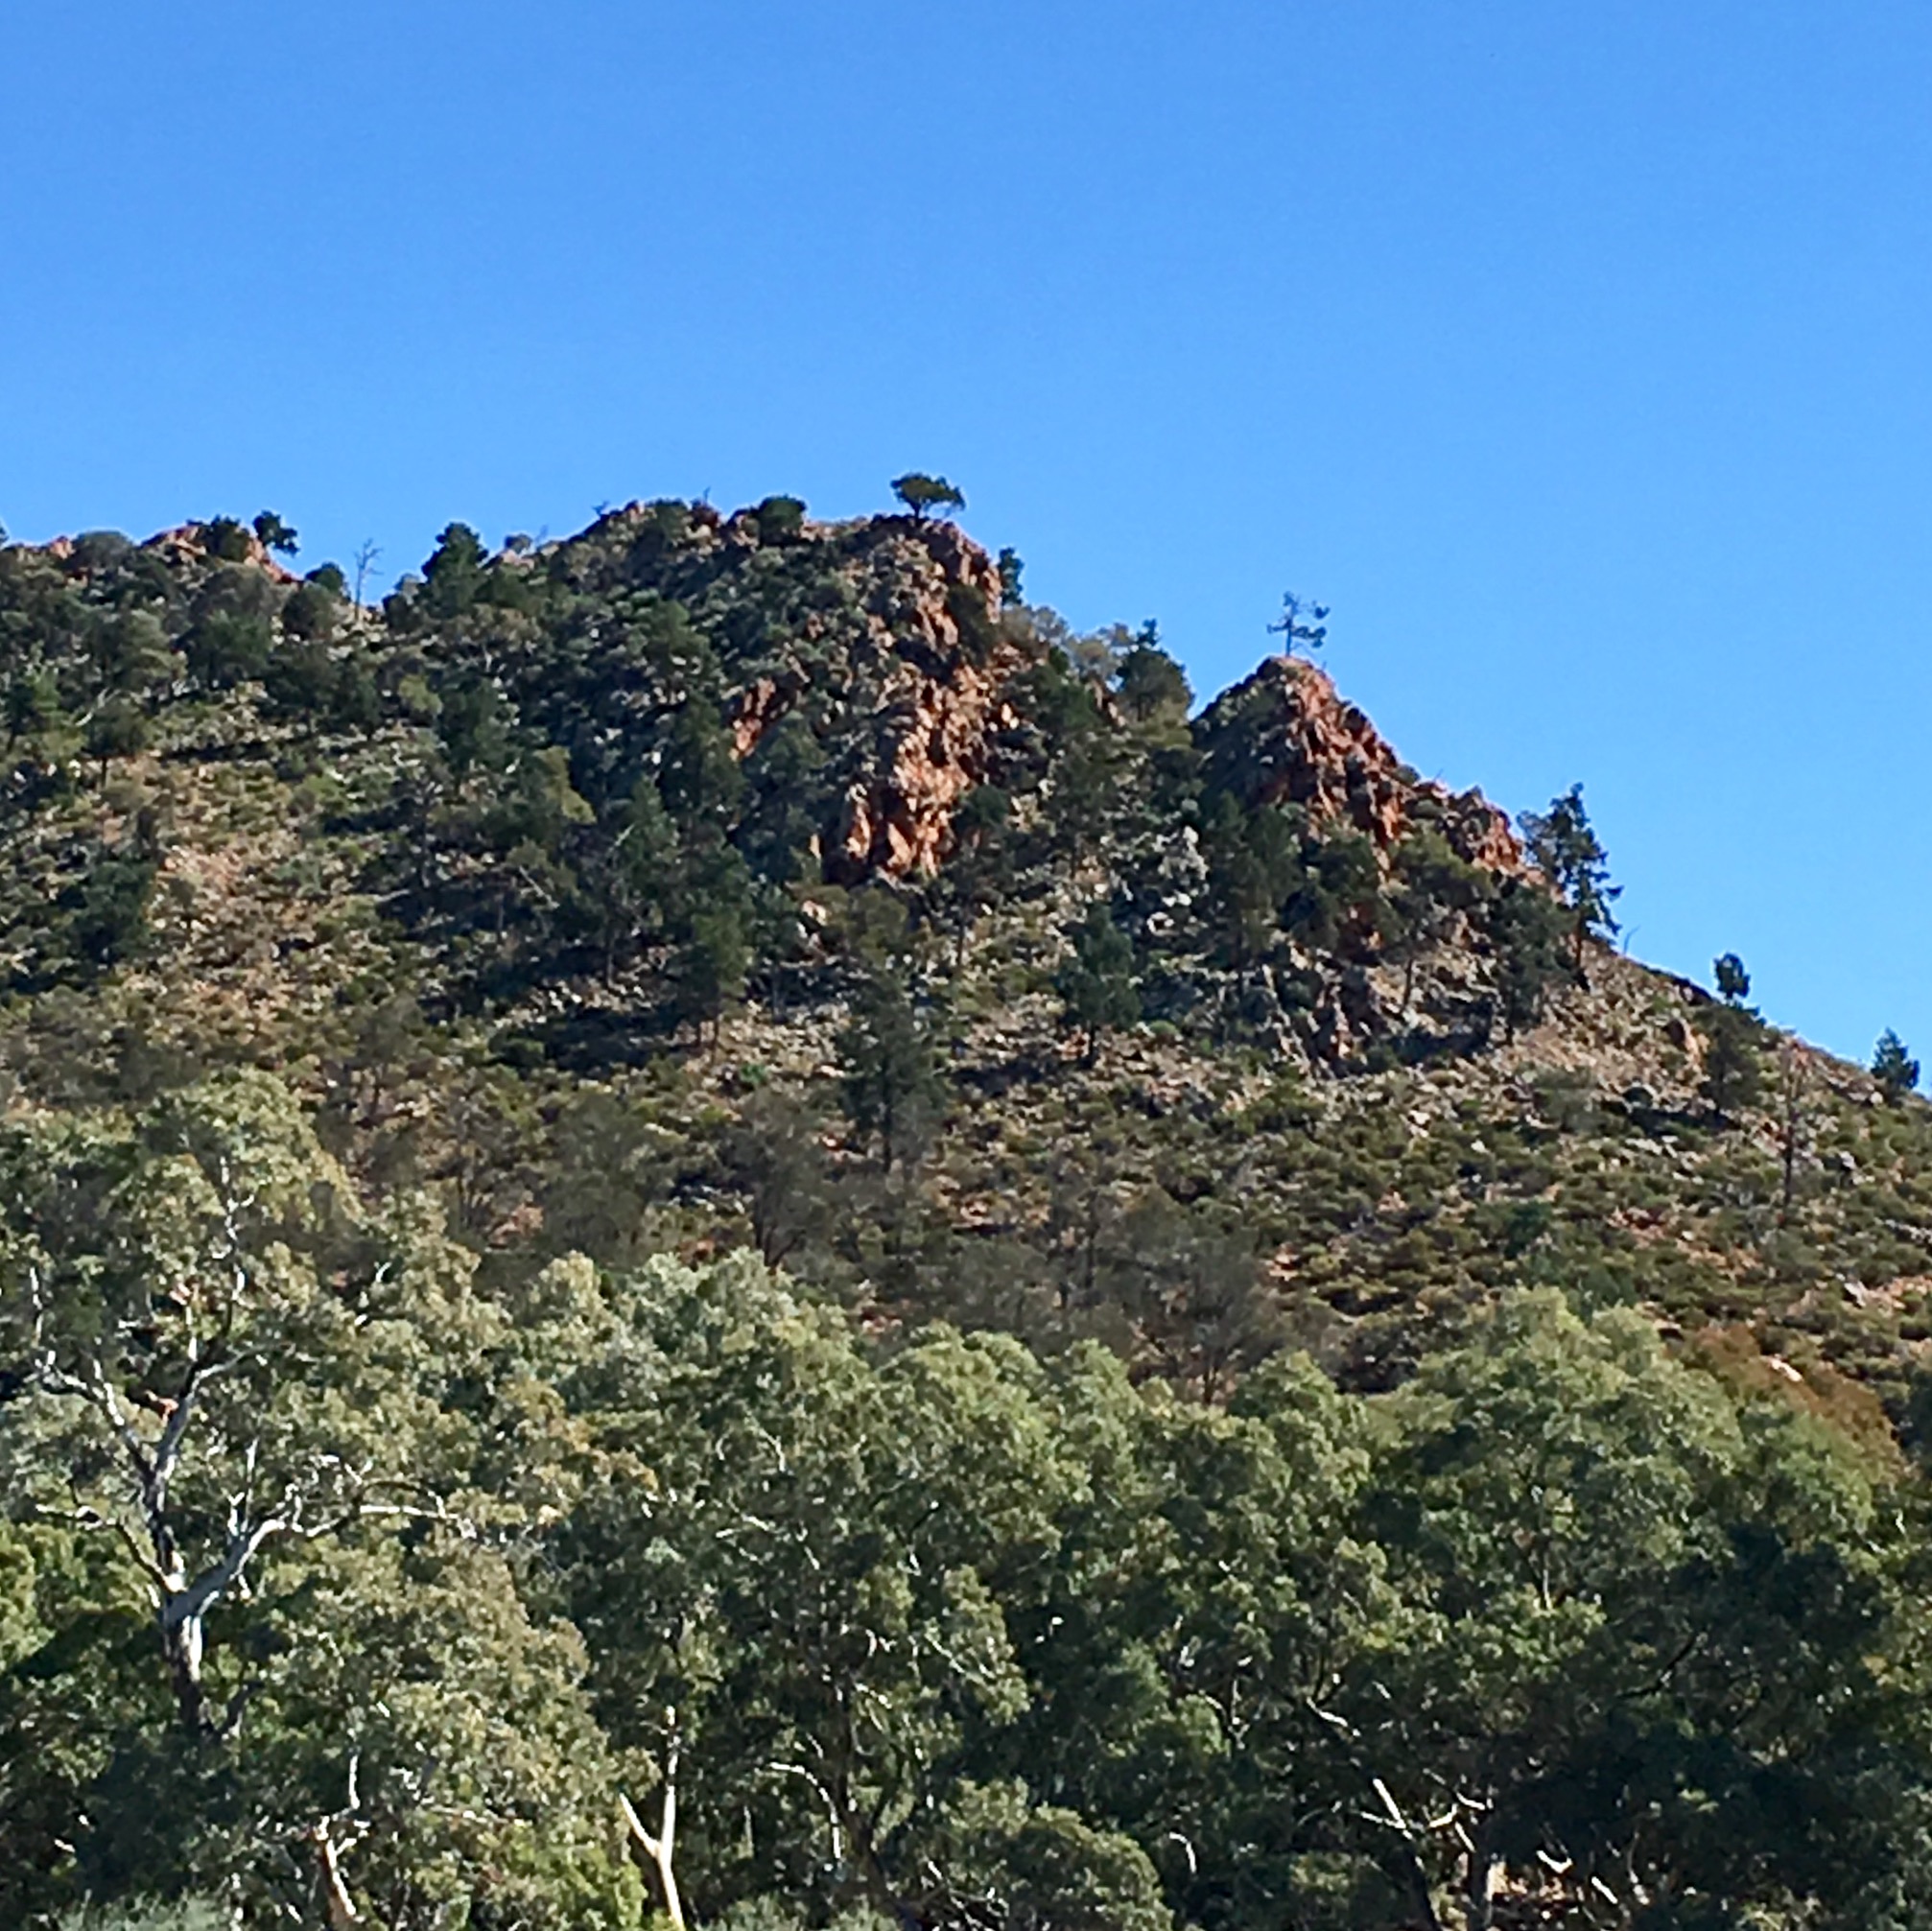 Rocky outcrop along the Frome River in the Flinders Ranges